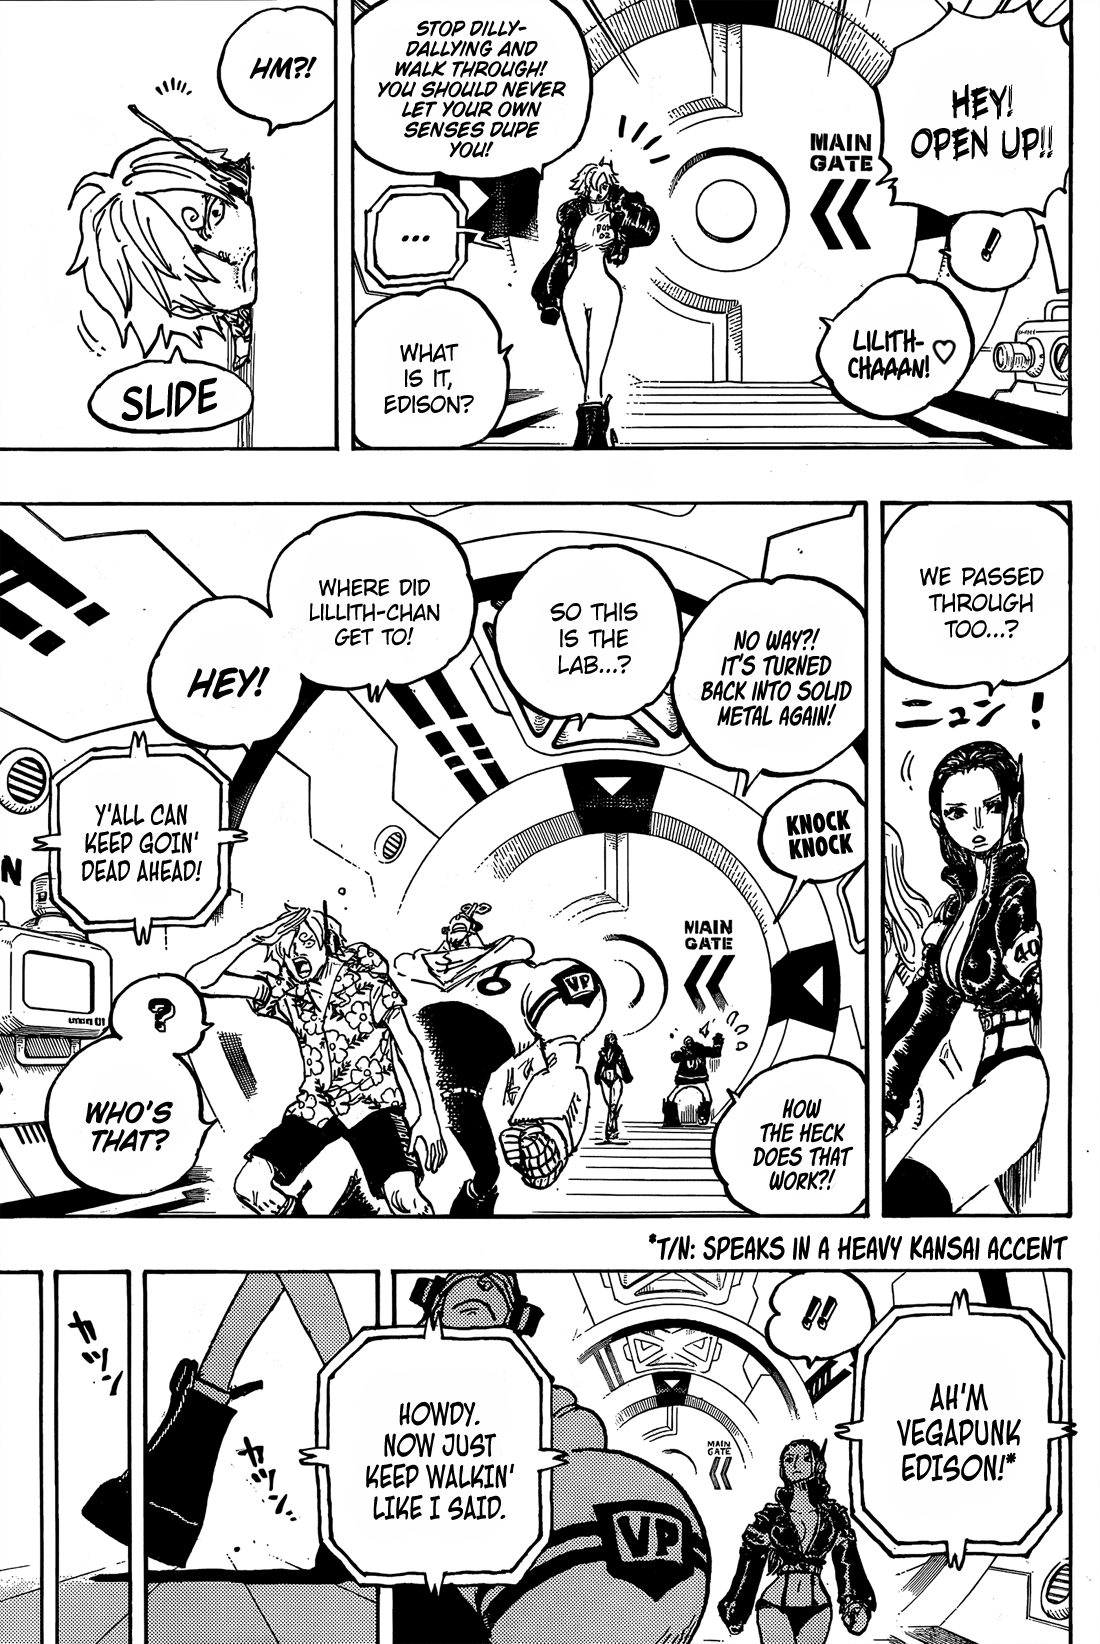 One Piece chapter 1065 (Full Spoilers): New Vegapunks introduced